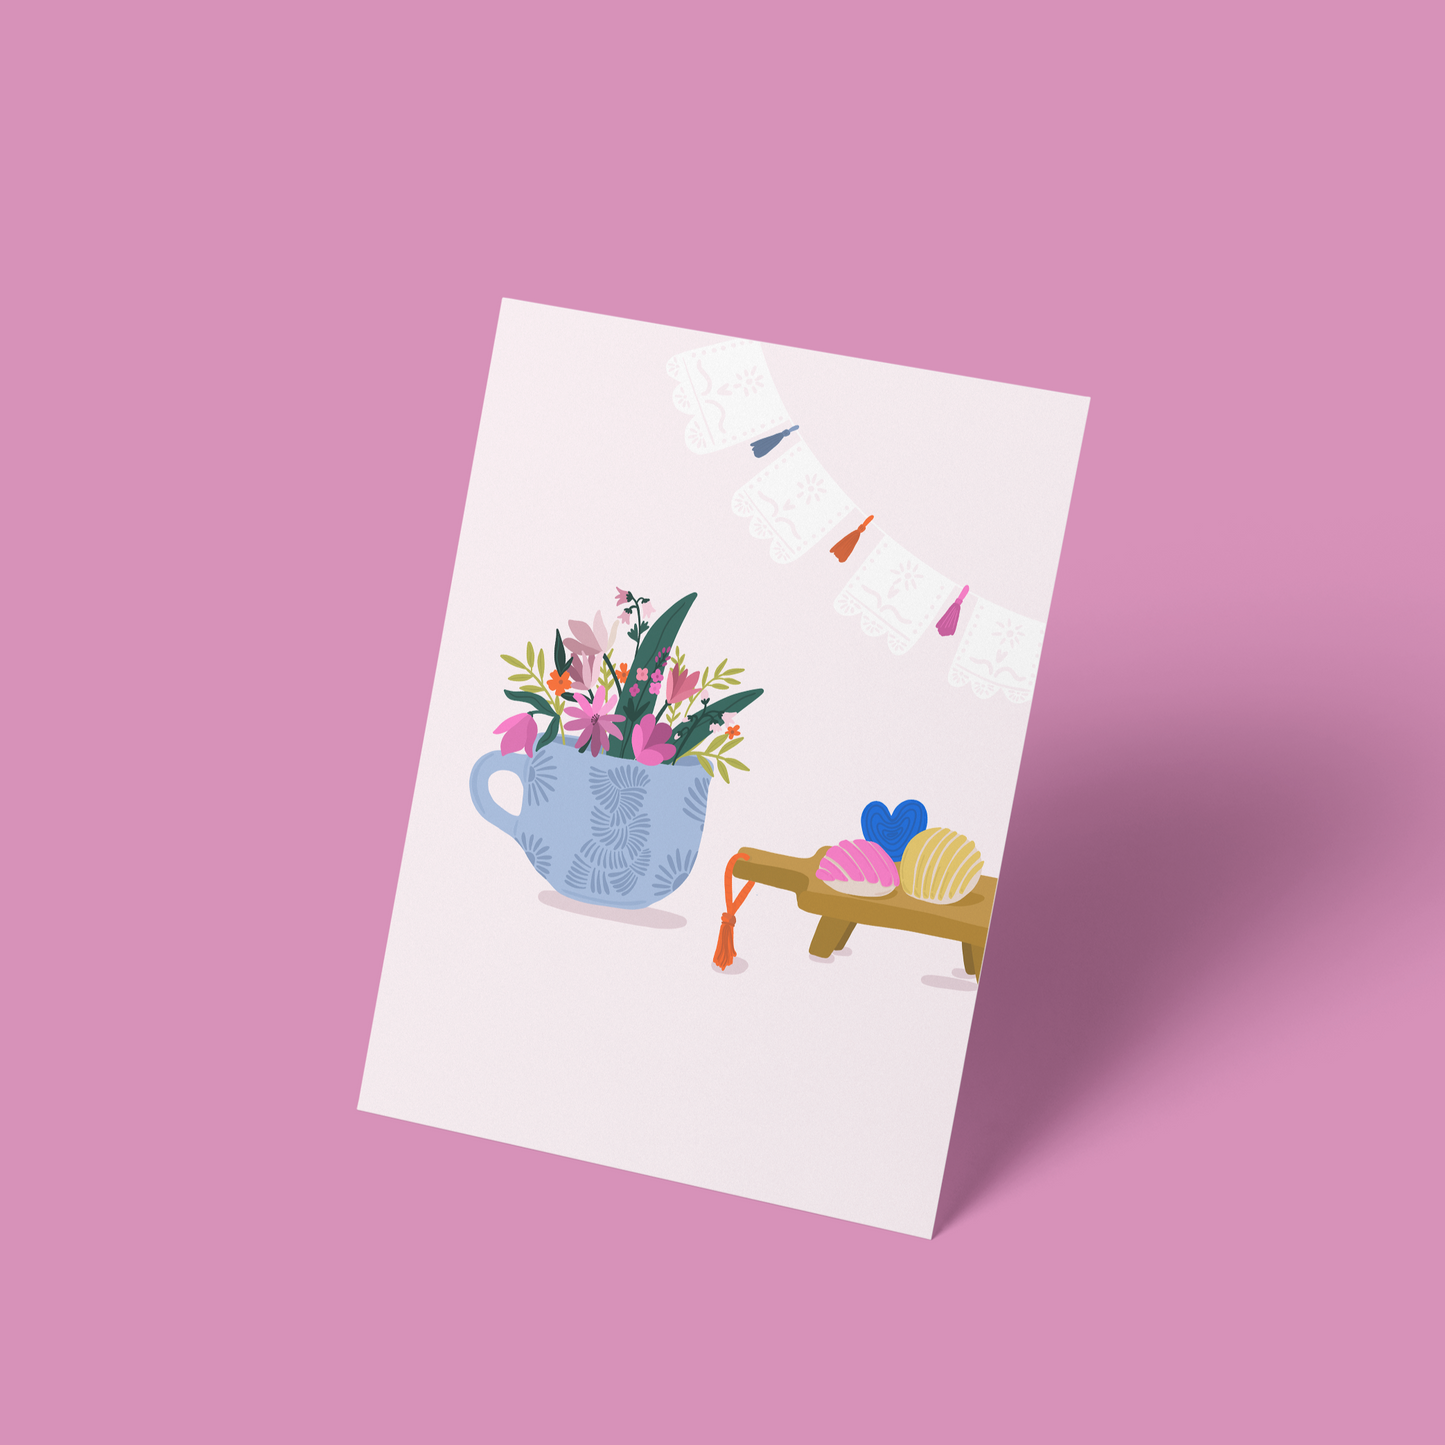 Cozy Morning Print : Tea, Flowers, and Mexican Treats